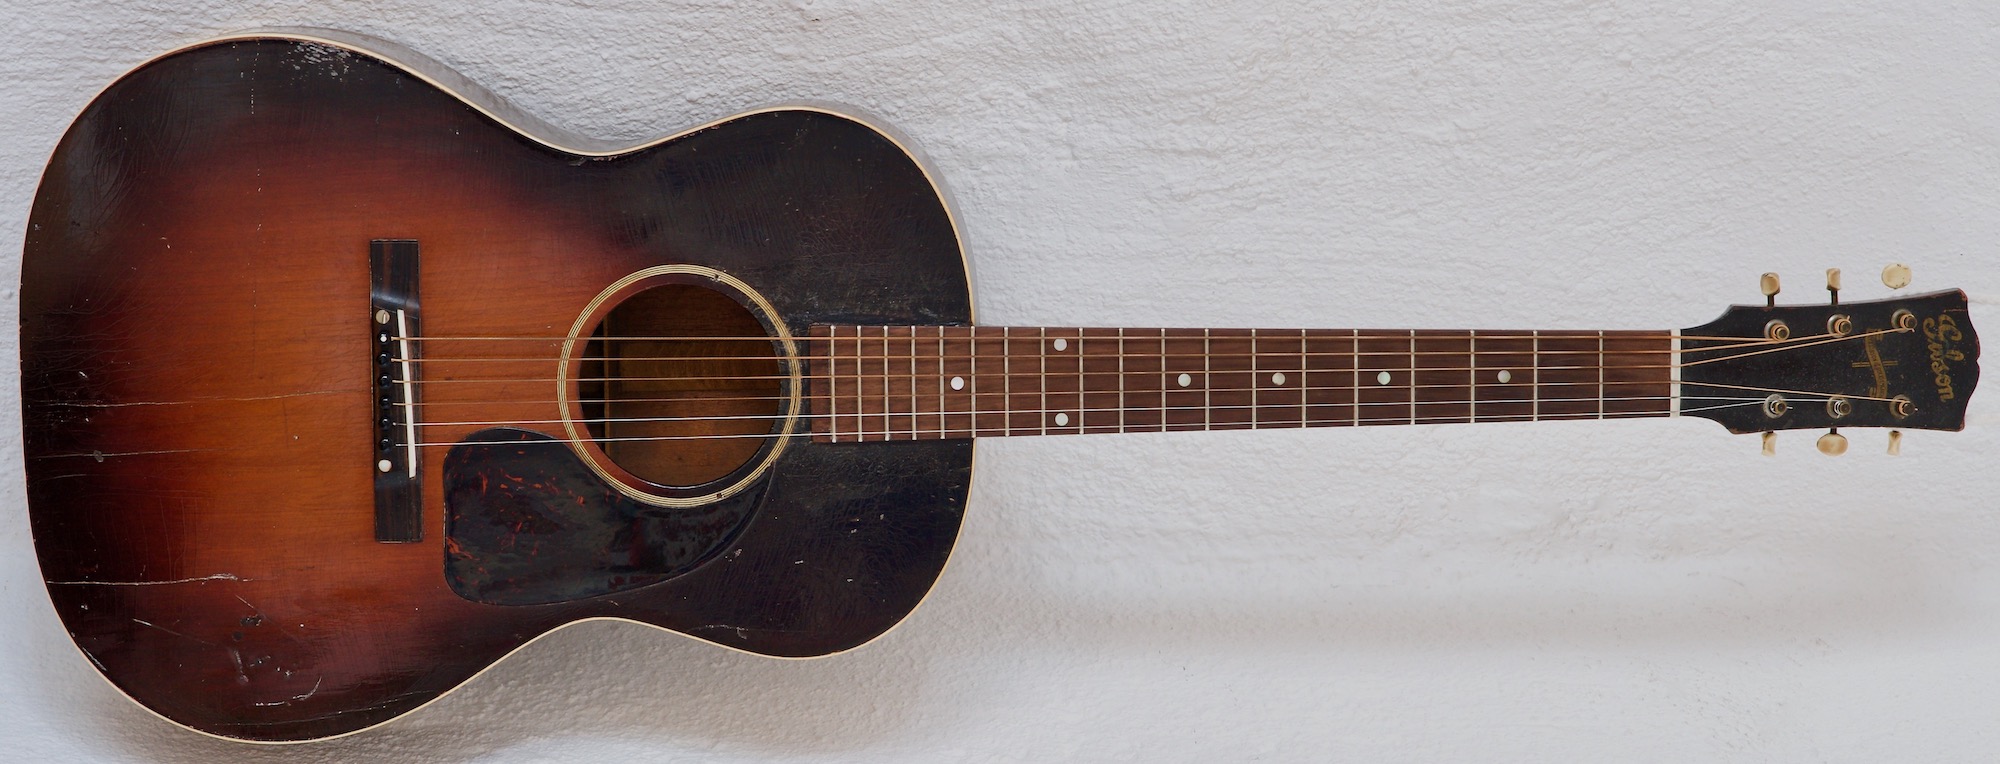 A Gibson LG-2 from 1943